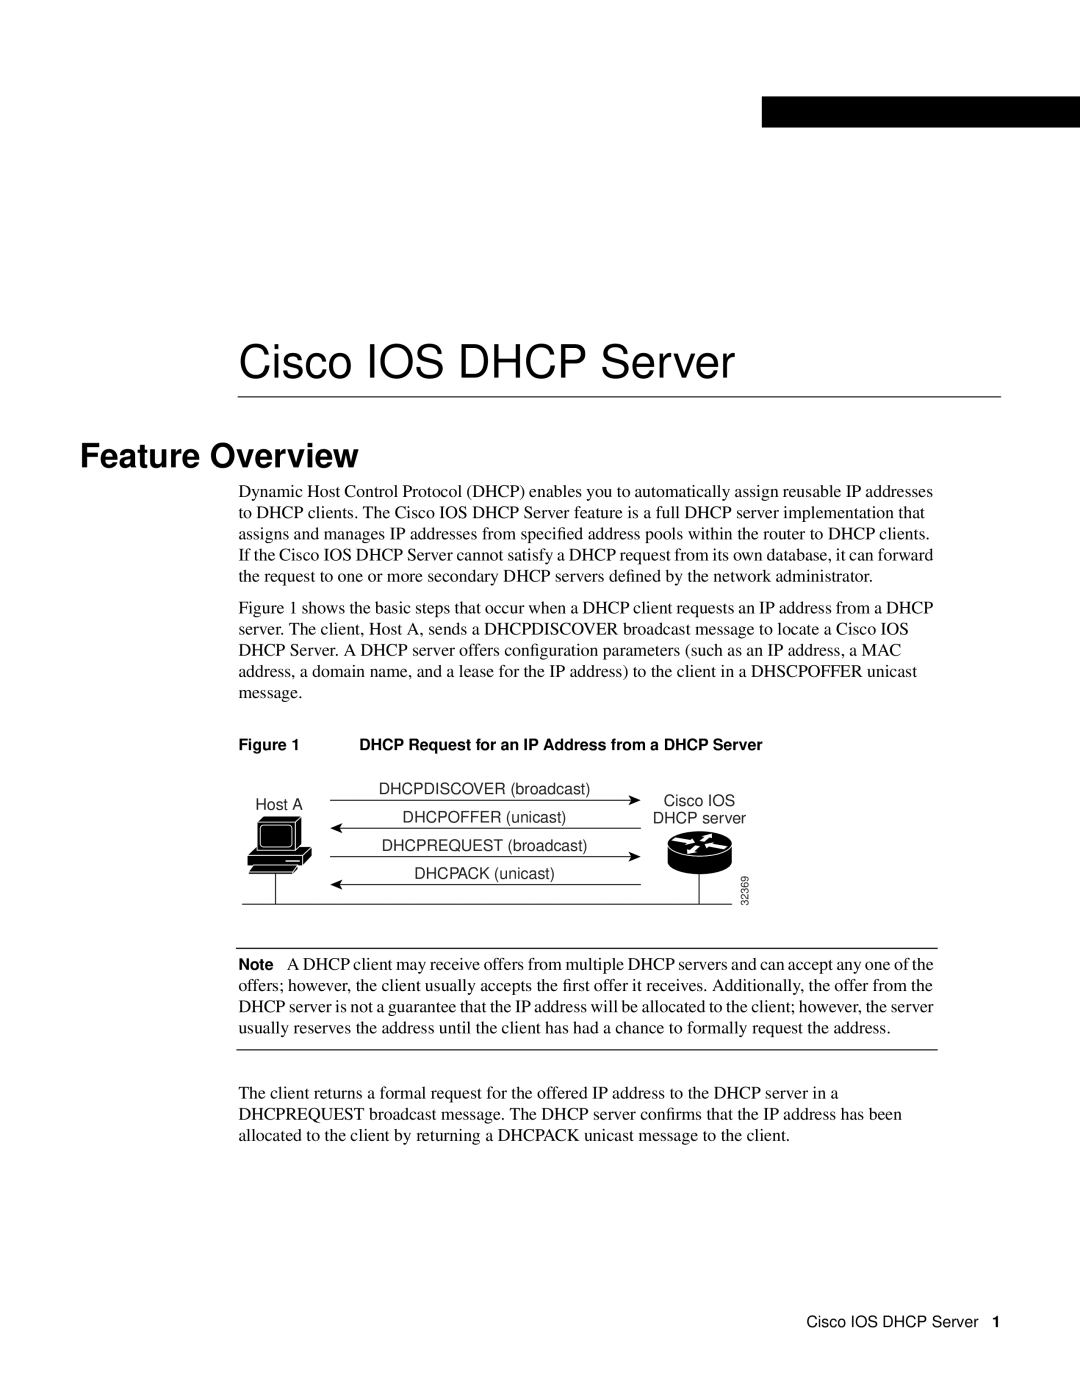 Cisco Systems 32369 manual Feature Overview, Cisco IOS DHCP Server 